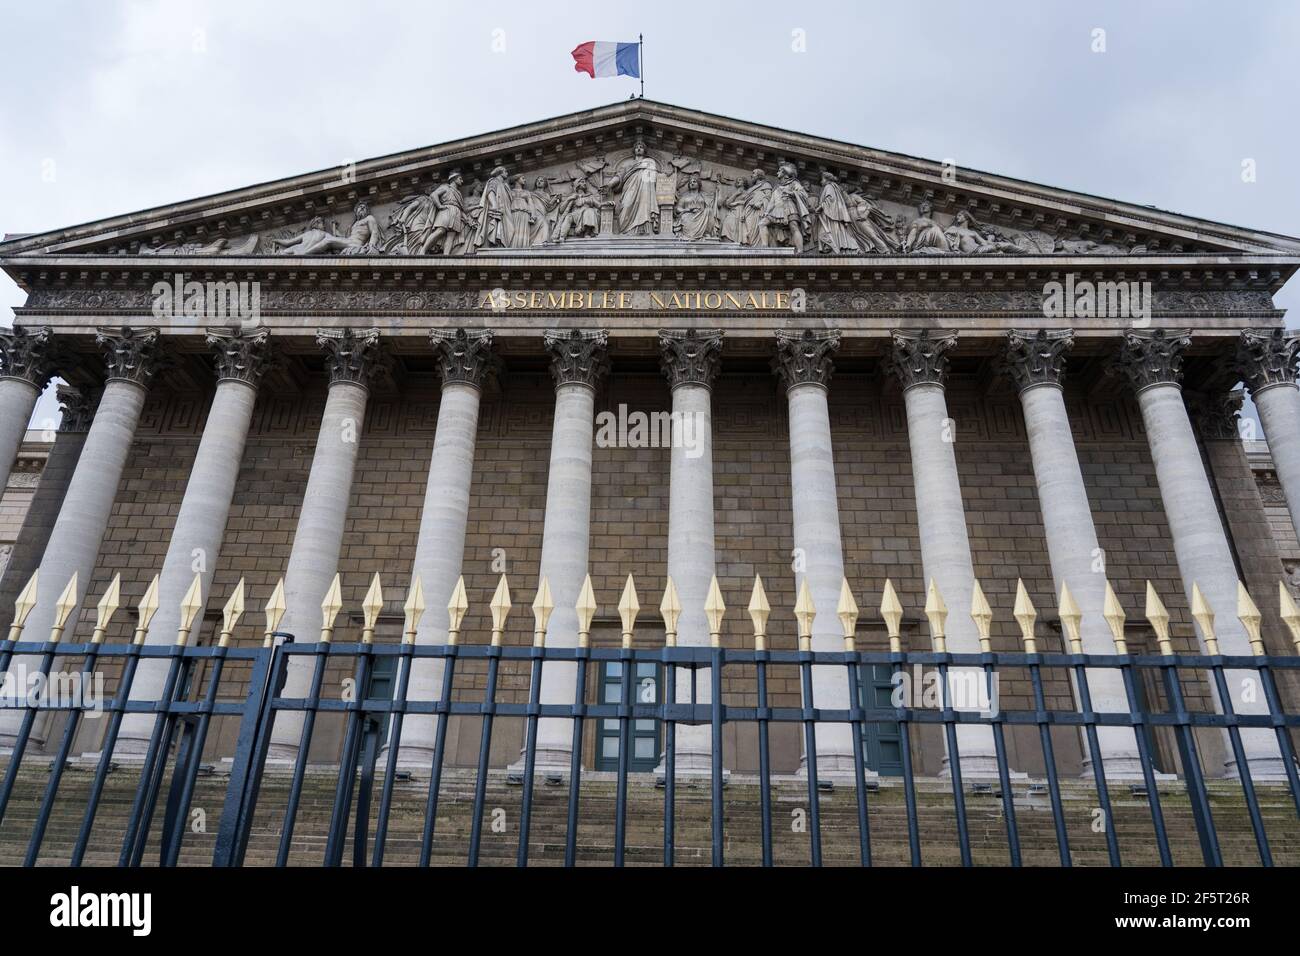 PARIS, FRANCE - The french national assembly (l'Assemblée nationale). Also called Palais Bourbon. French parliament. Stock Photo